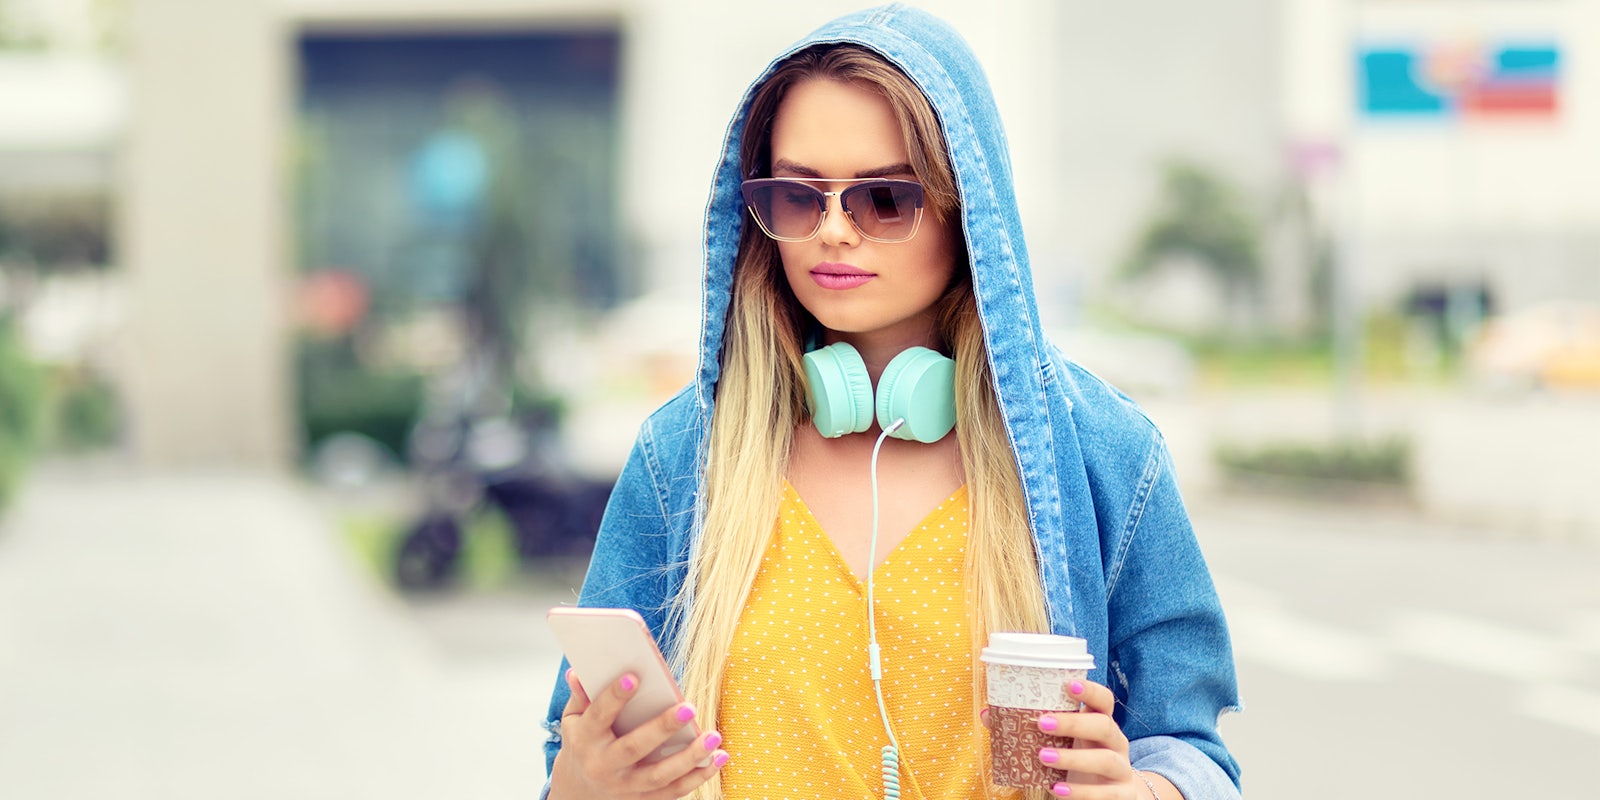 woman in hoody and sunglasses walking with coffee and phone